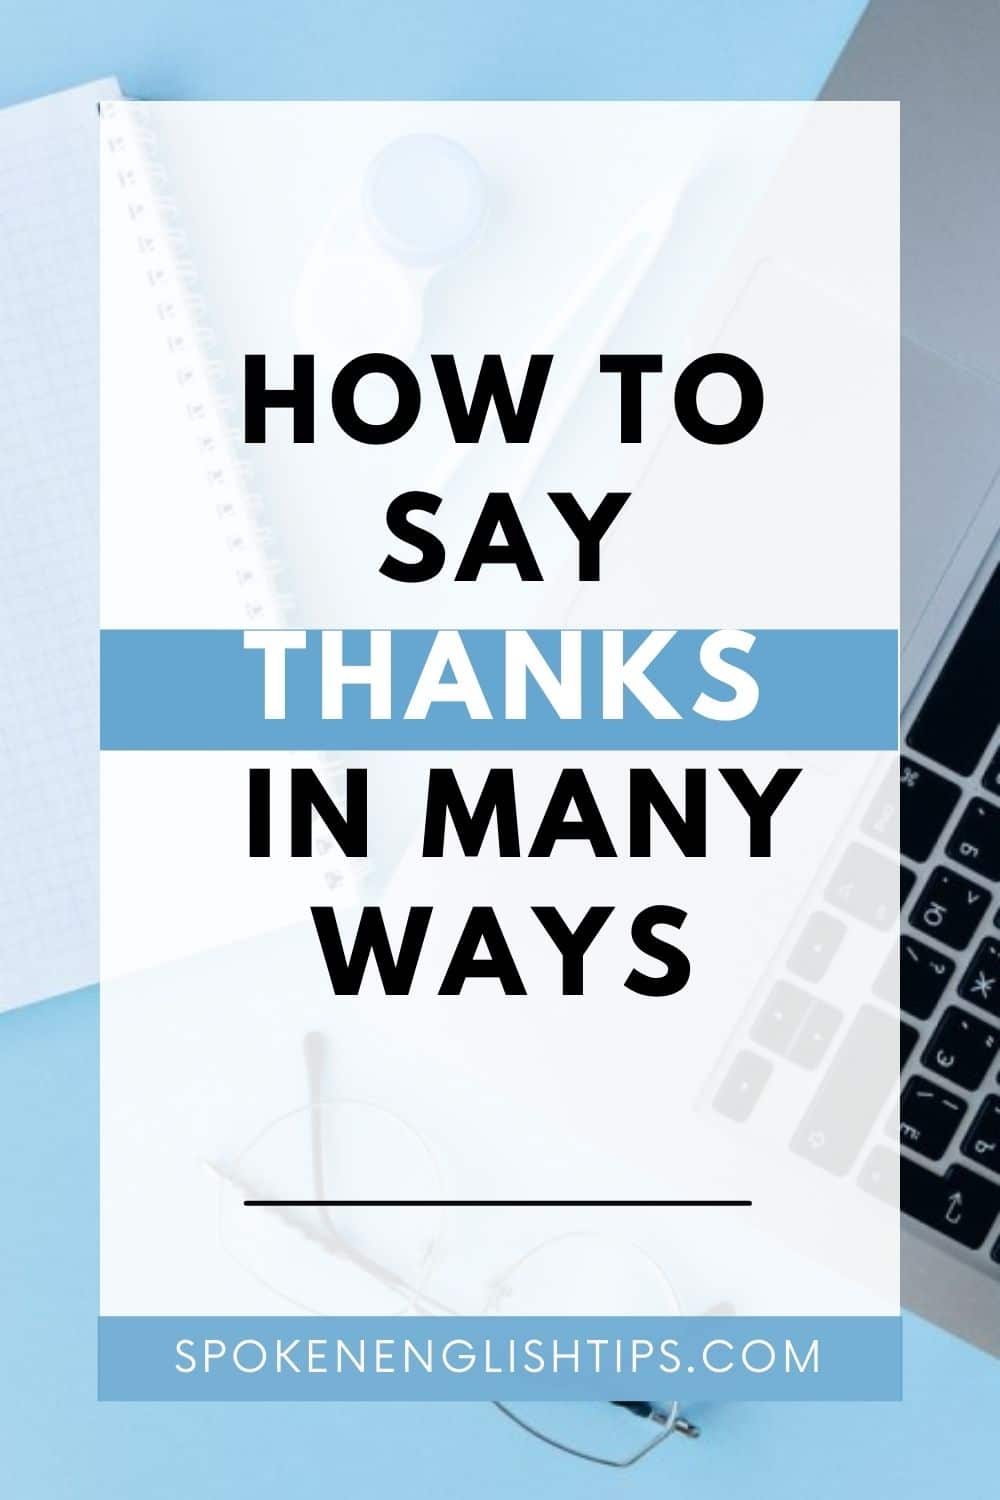 Ways to Say thanks and "Thank you very much"